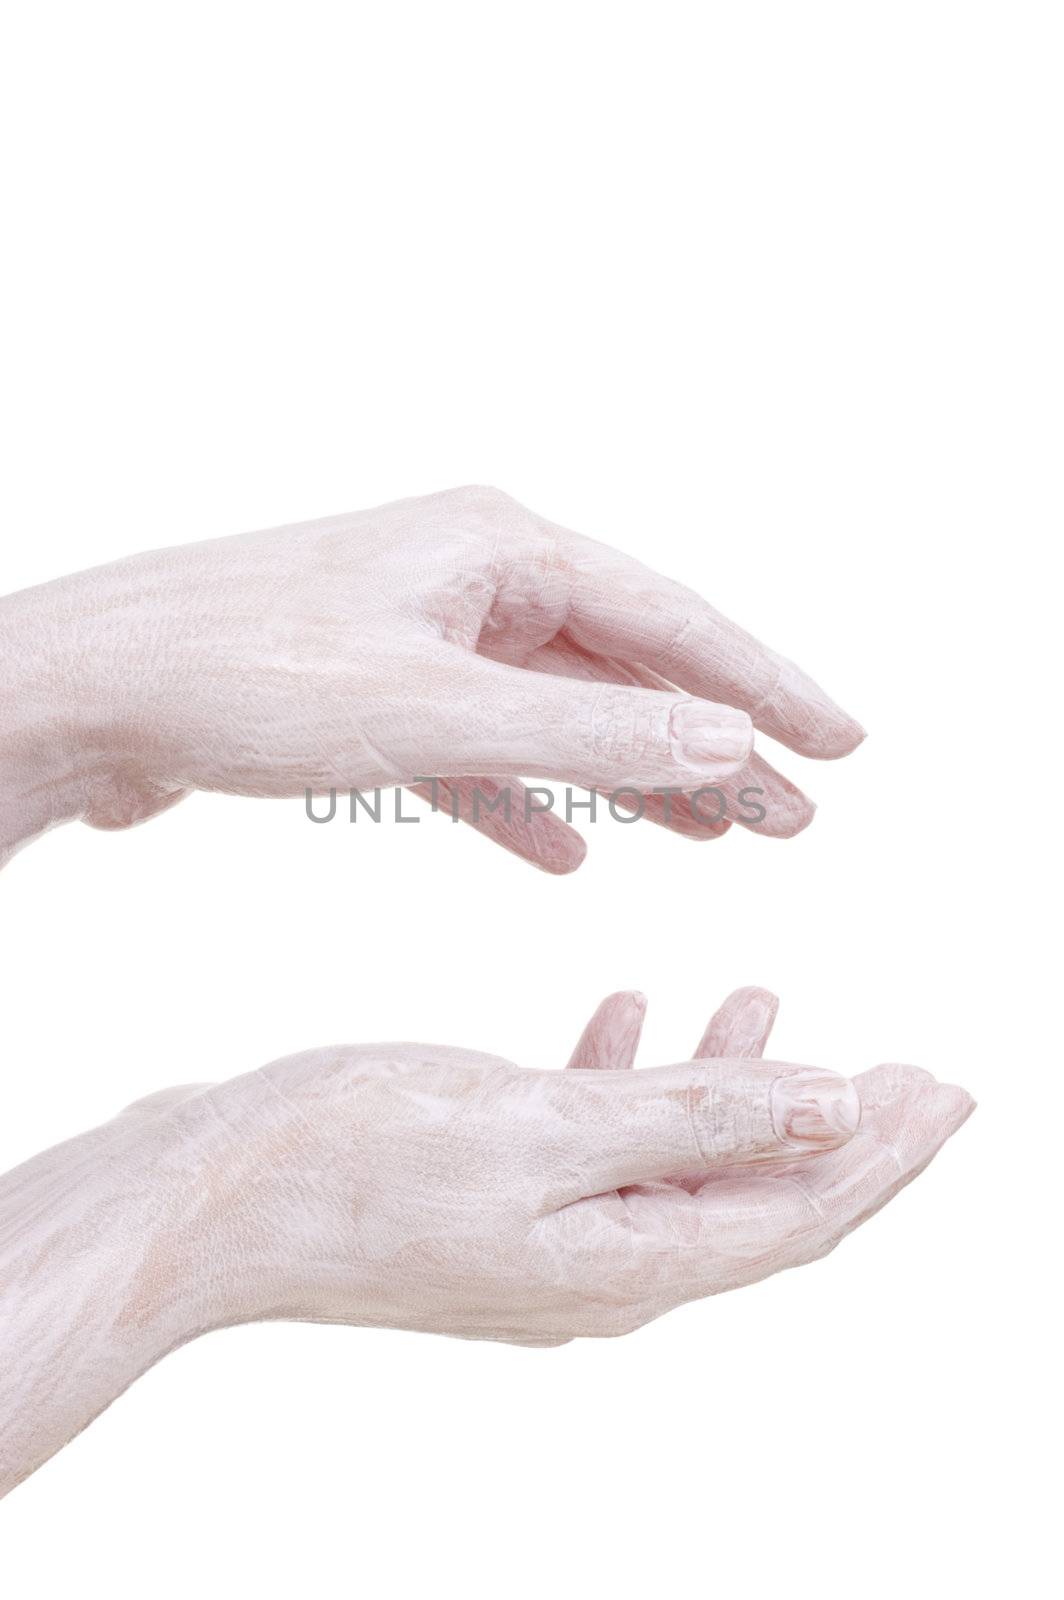 hydrating cream on the hands, isolated on white